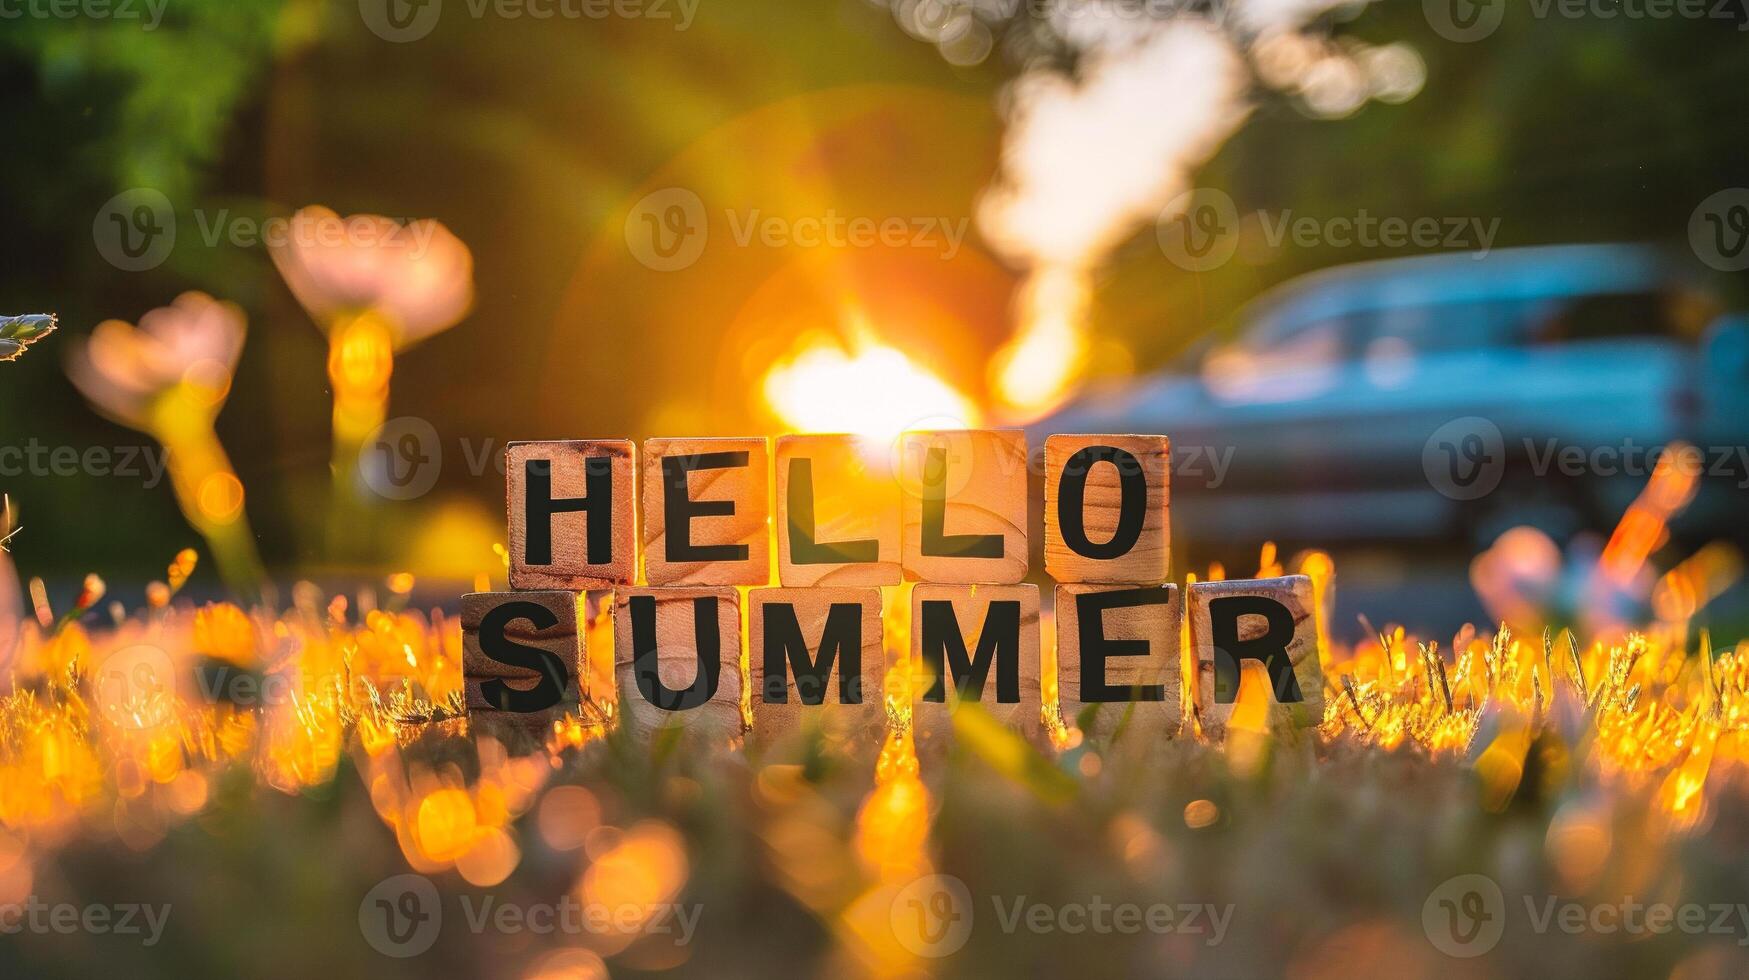 AI generated Hello summer text message on wooden blocks in the grass with car background photo